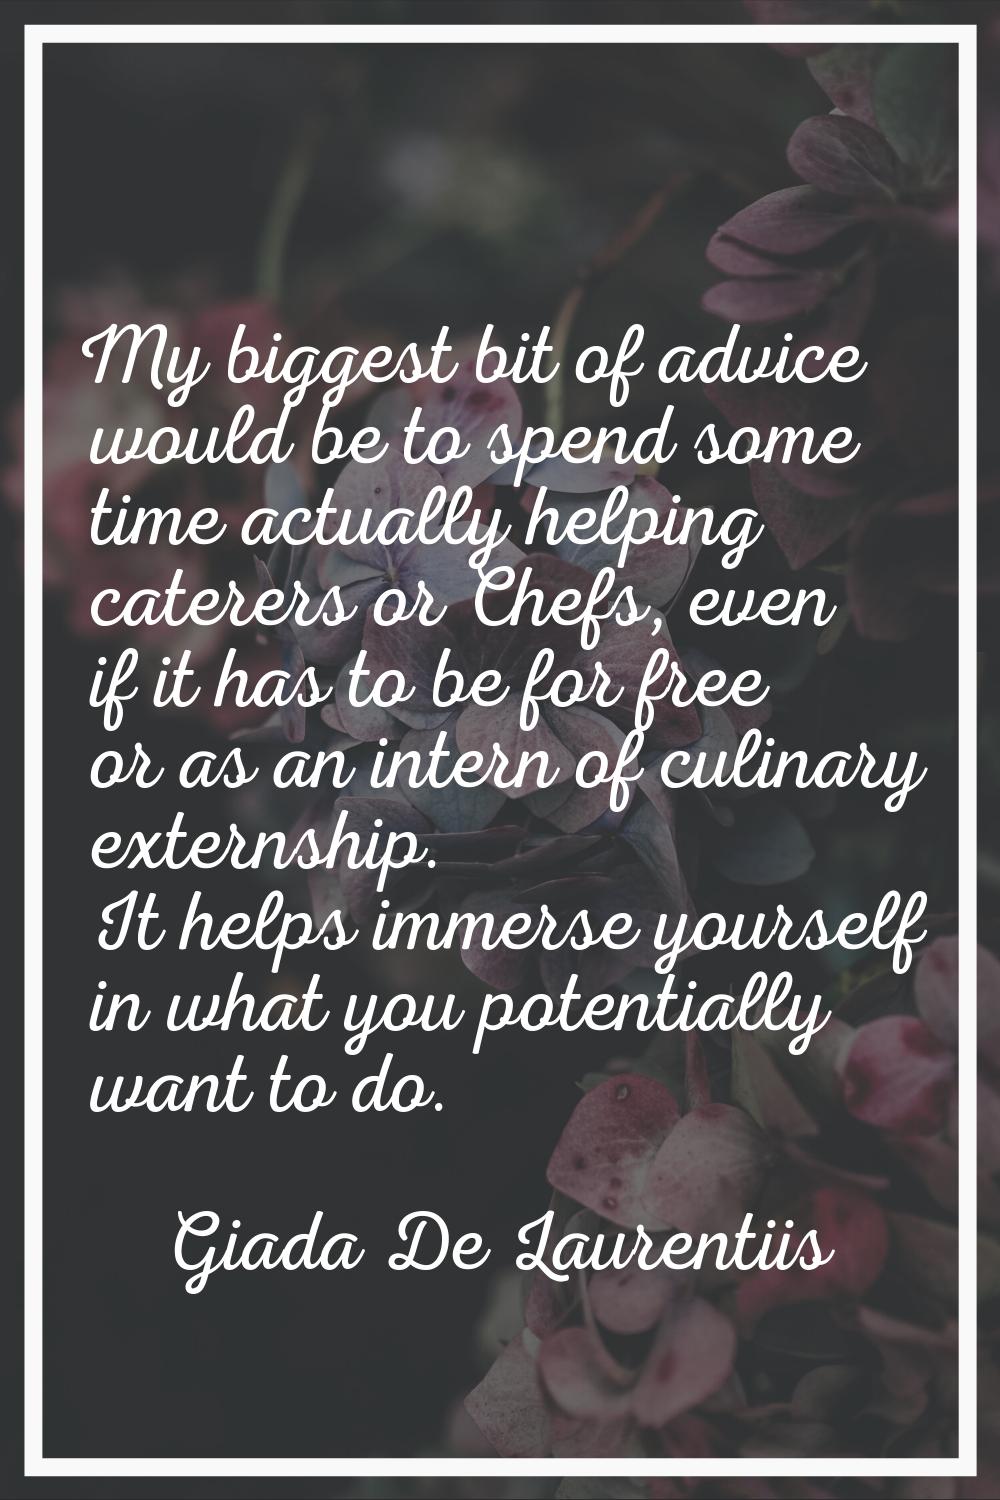 My biggest bit of advice would be to spend some time actually helping caterers or Chefs, even if it